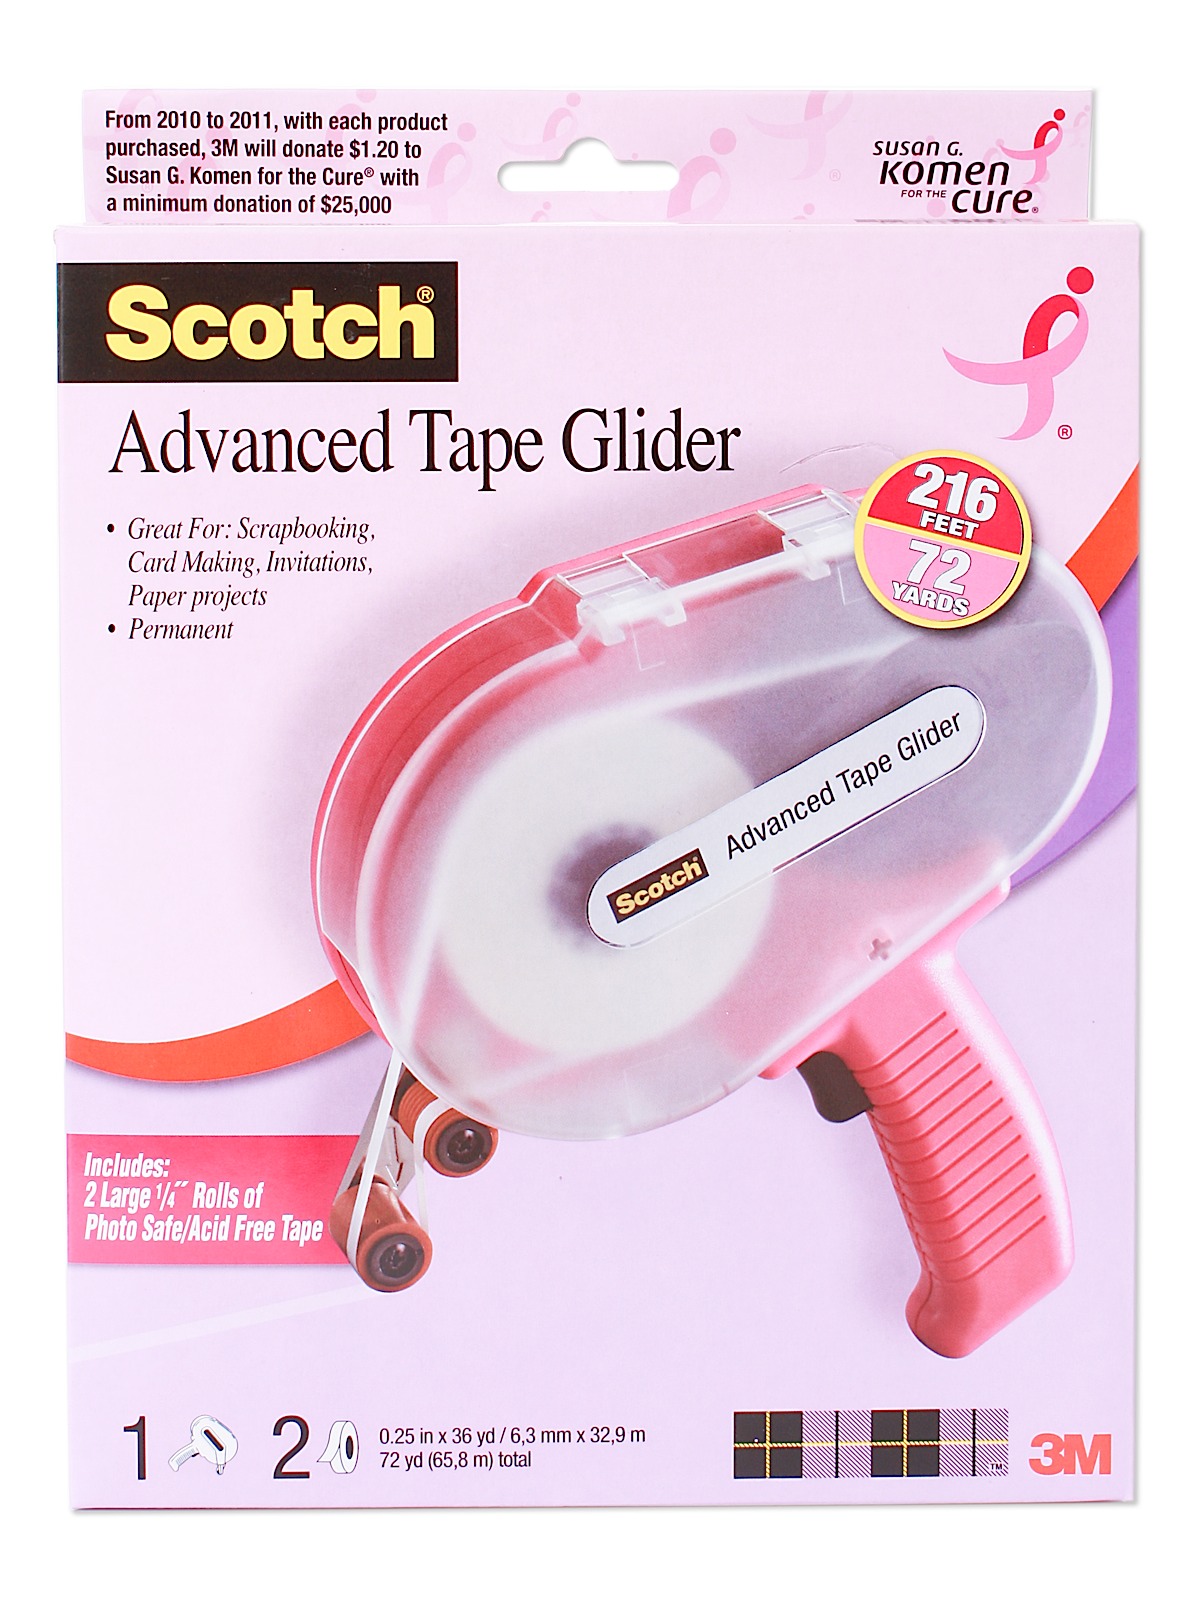 Advanced Tape Glider Tape Glider And Two Refills 1 4 In.